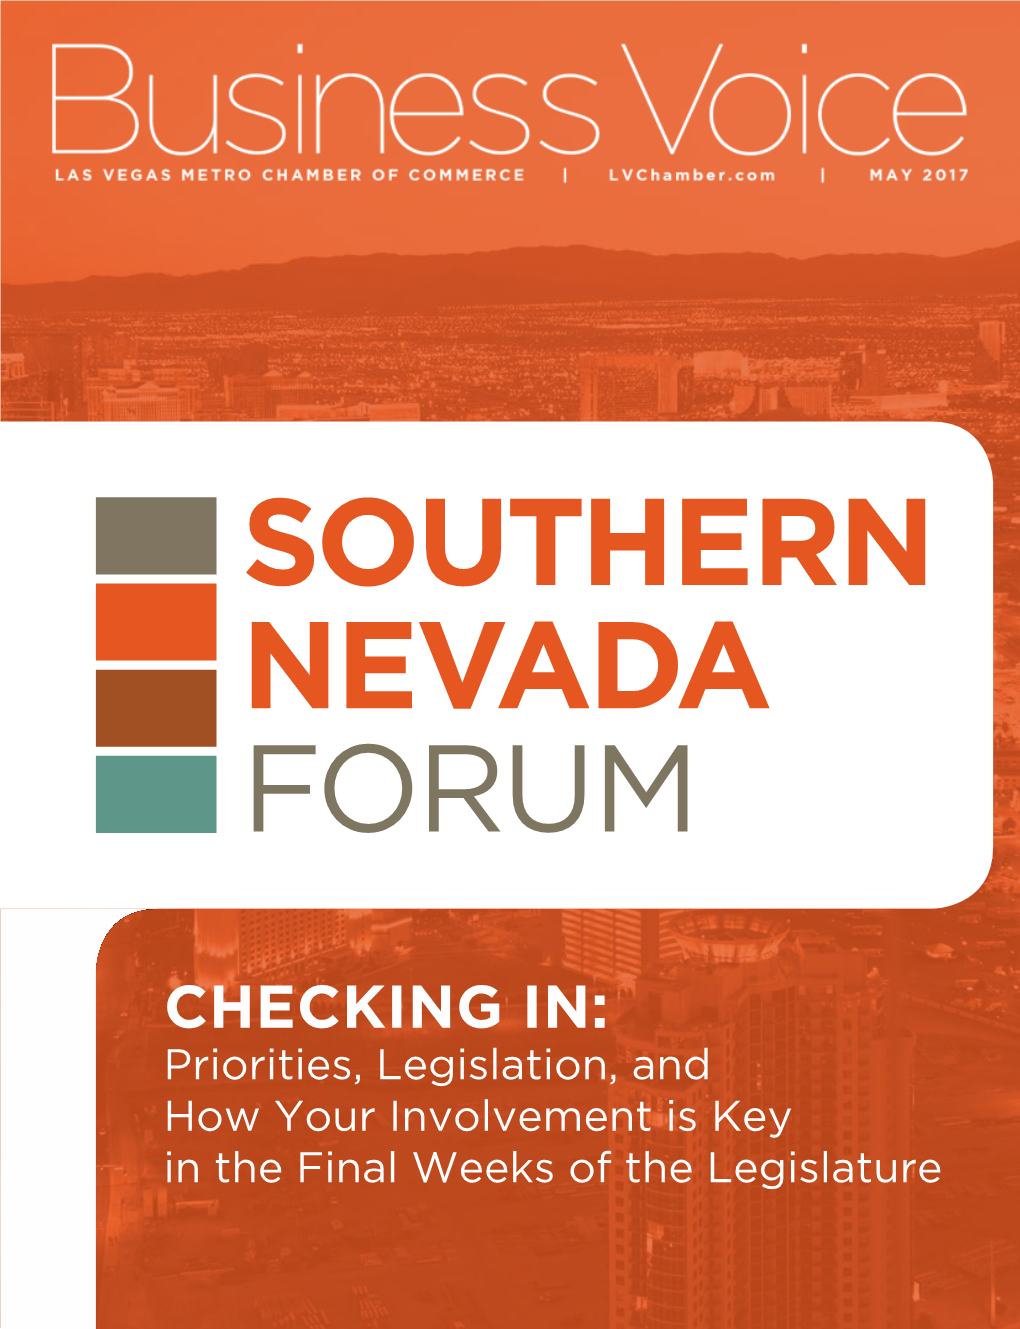 Checking in with the Southern Nevada Forum